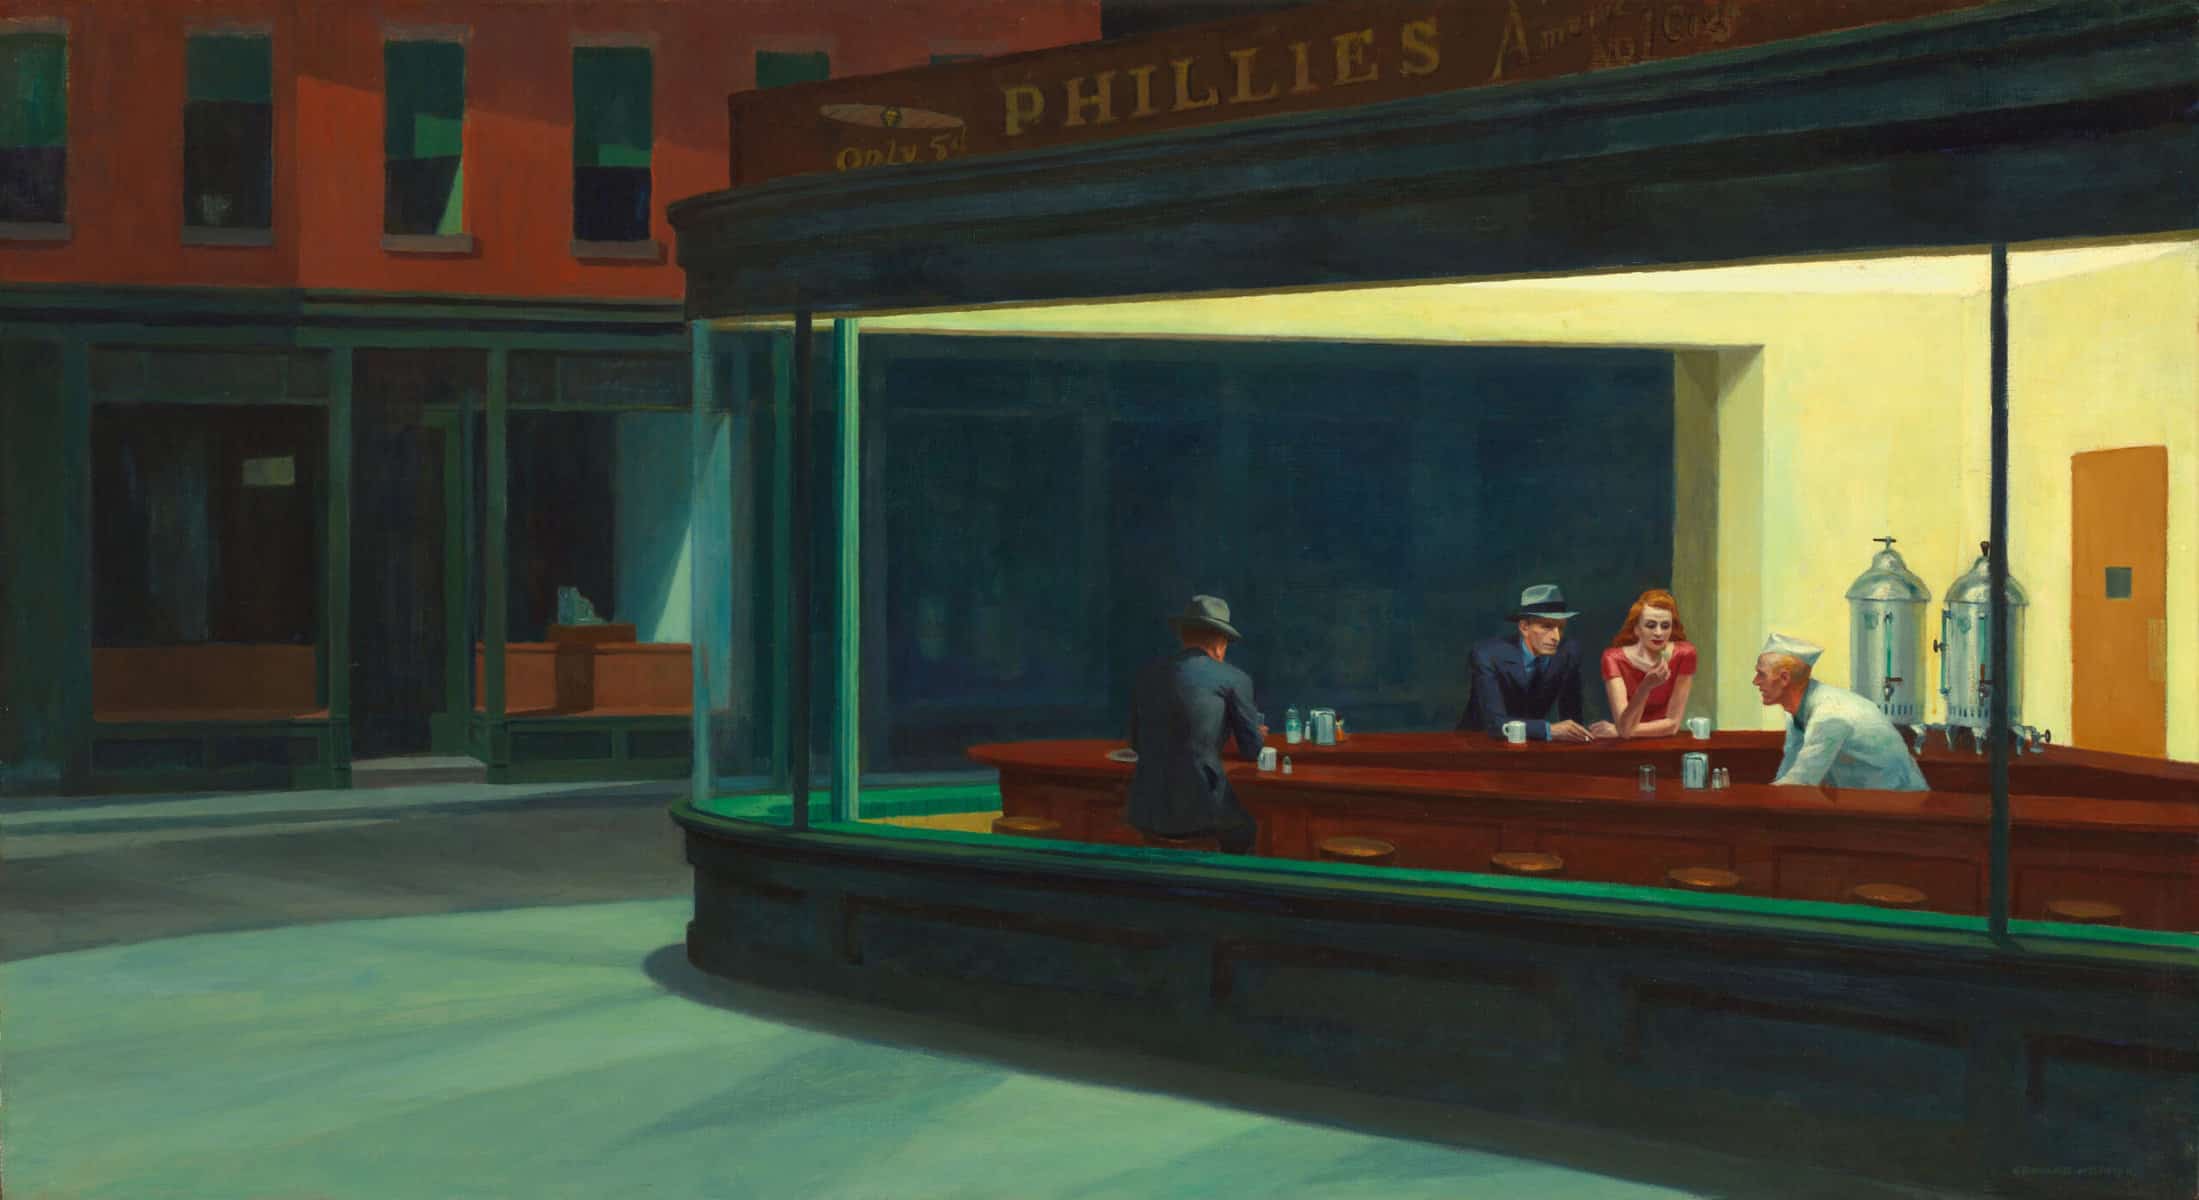 Edward Hopper art work which depicts the scene into a diner window at night